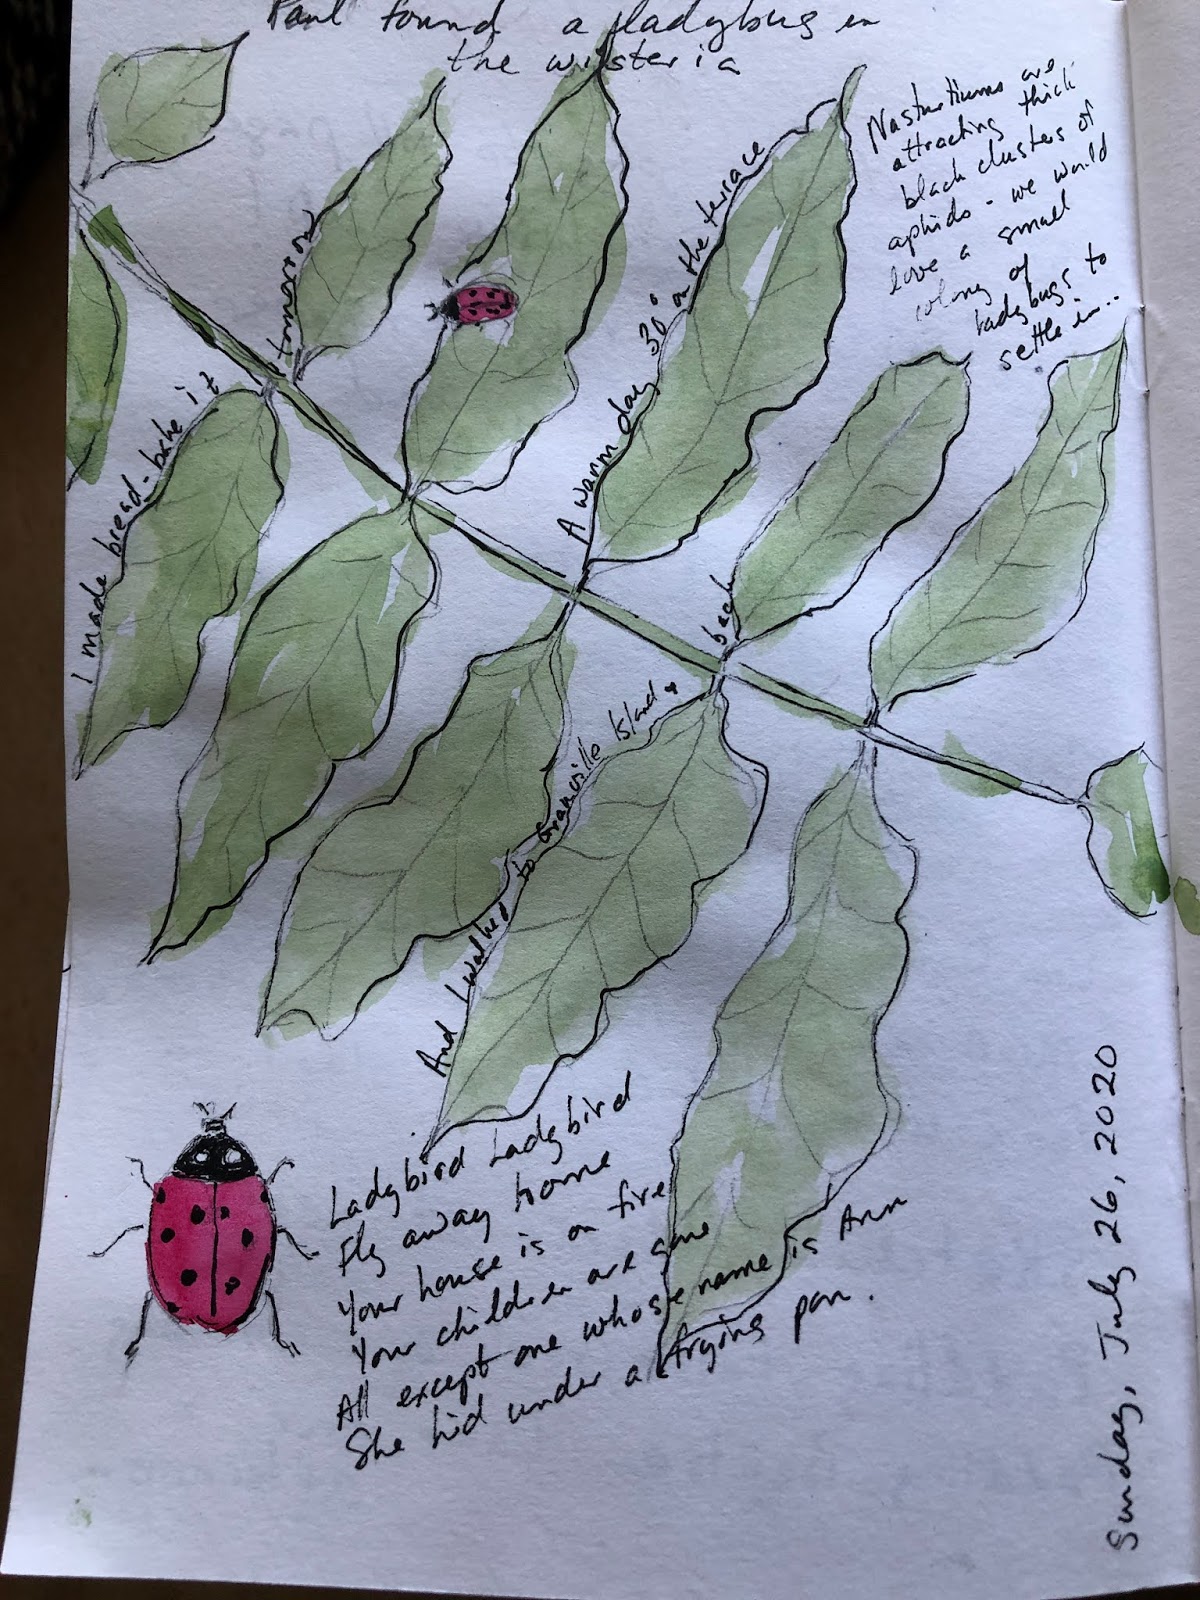 Summer Sketch: Of Wisteria and Ladybugs, Cycling and Bread-baking